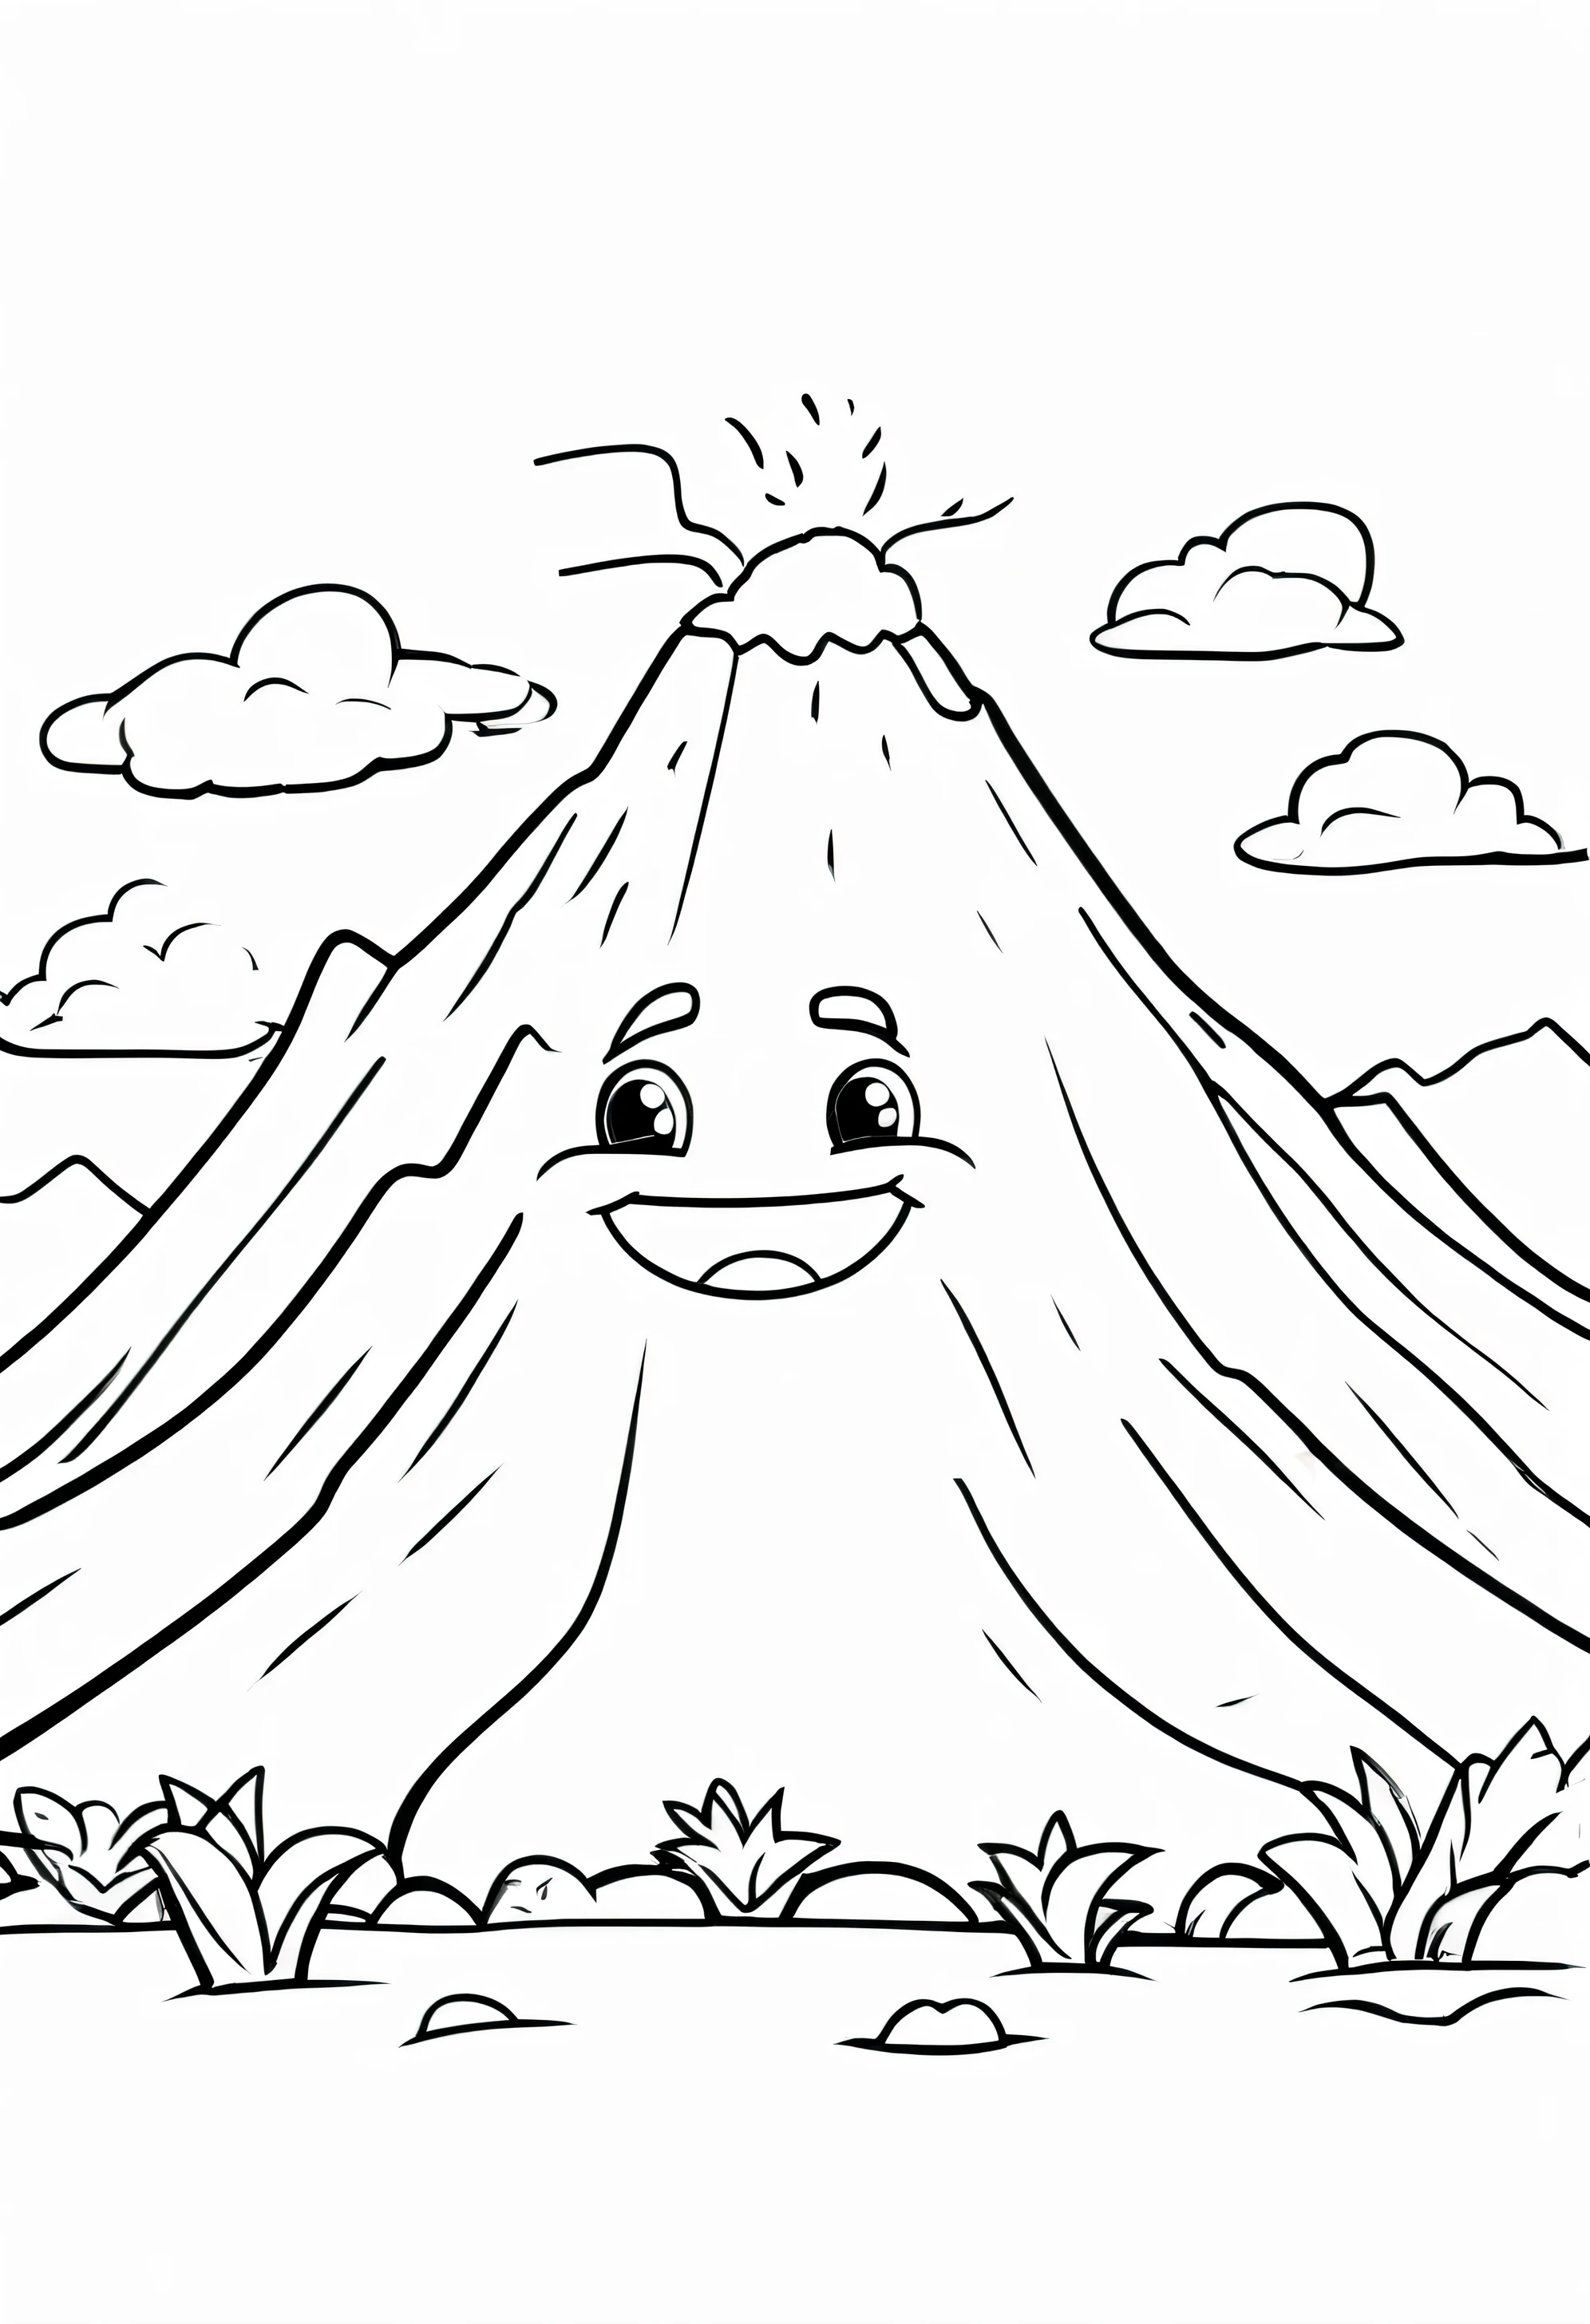 create a friendly Volcano character with smiling face, outline art With white, White background, Sketch Style, full body, Only use outline, Cartoon style, Clean and clear and well outlined, Ensure the Volcano has smooth And inviting appearance, And keep the design Minimalistic For easy coloring. The goal is To make it appealing And approachable For children aged 2 to 5 In the middle of their Artistic journey, Made it black and white